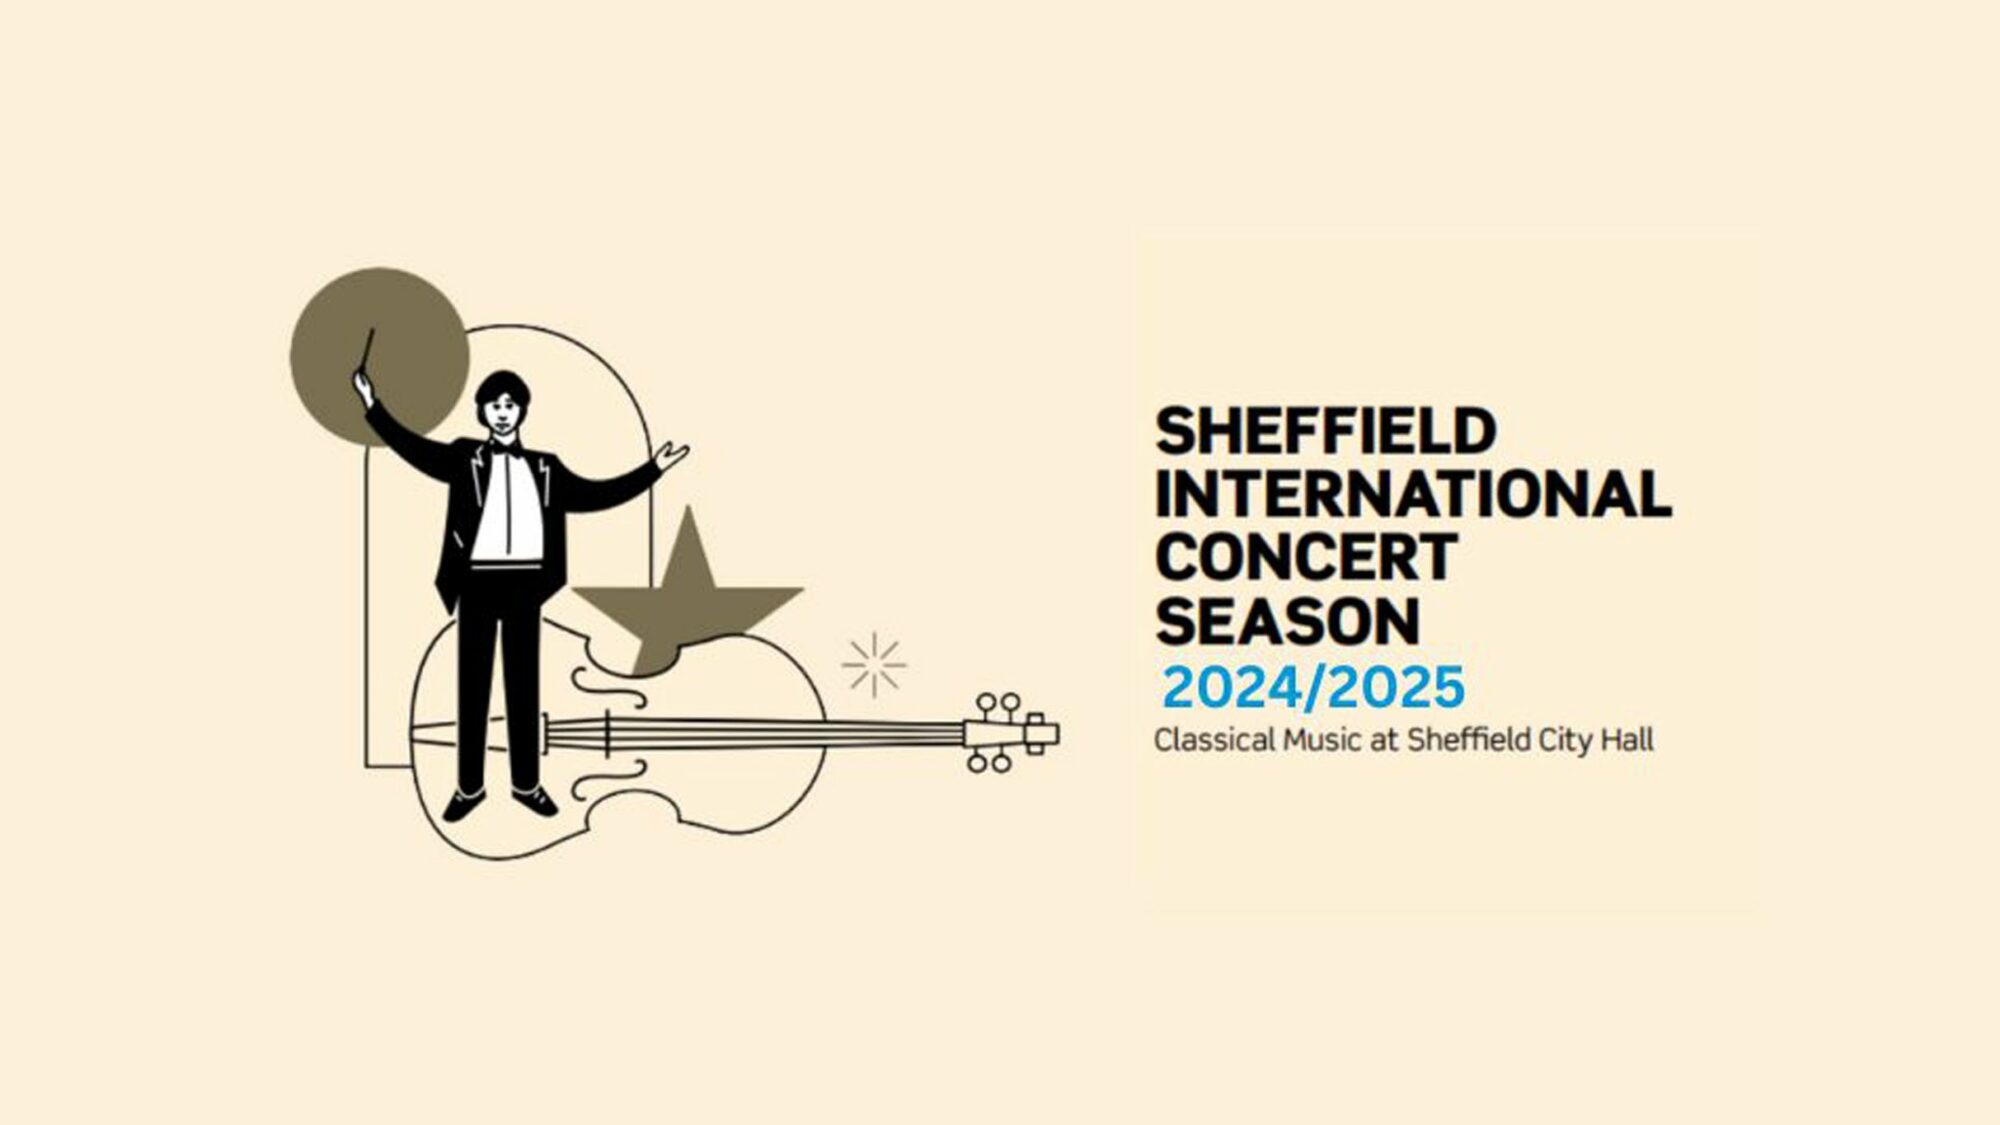 Image name Sheffield International Concert Season 202324 The Halle at Sheffield City Hall Oval Hall Sheffield the 1 image from the post Sheffield International Concert Season: 2024/25 Season Ticket at Sheffield City Hall Oval Hall, Sheffield in Yorkshire.com.